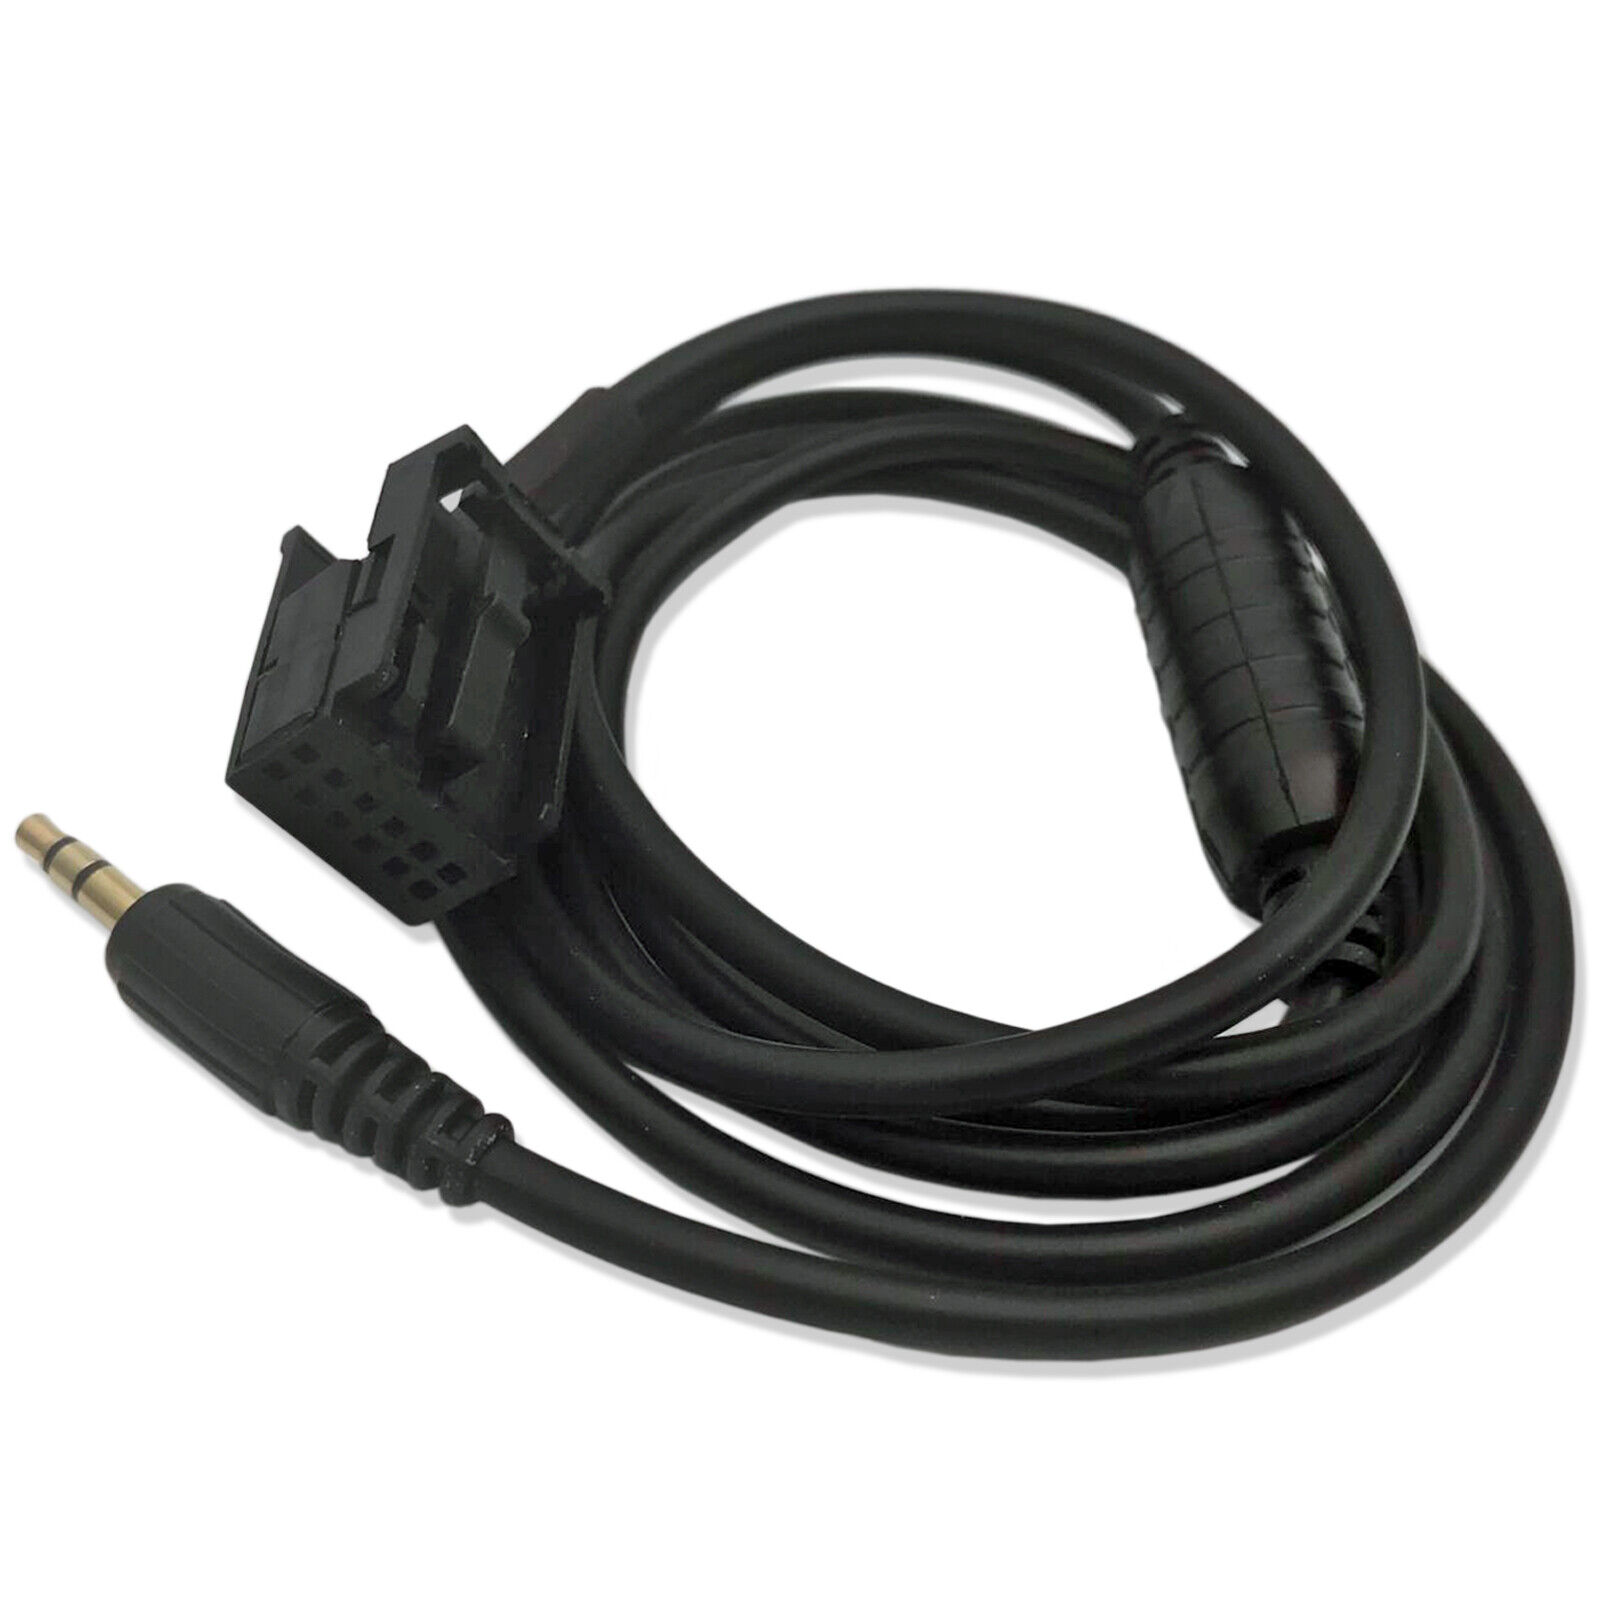 New 3.5mm Male AUX Audio Adapter Cable For 2004 2005 2006 2007-2010 BMW (E83) X3